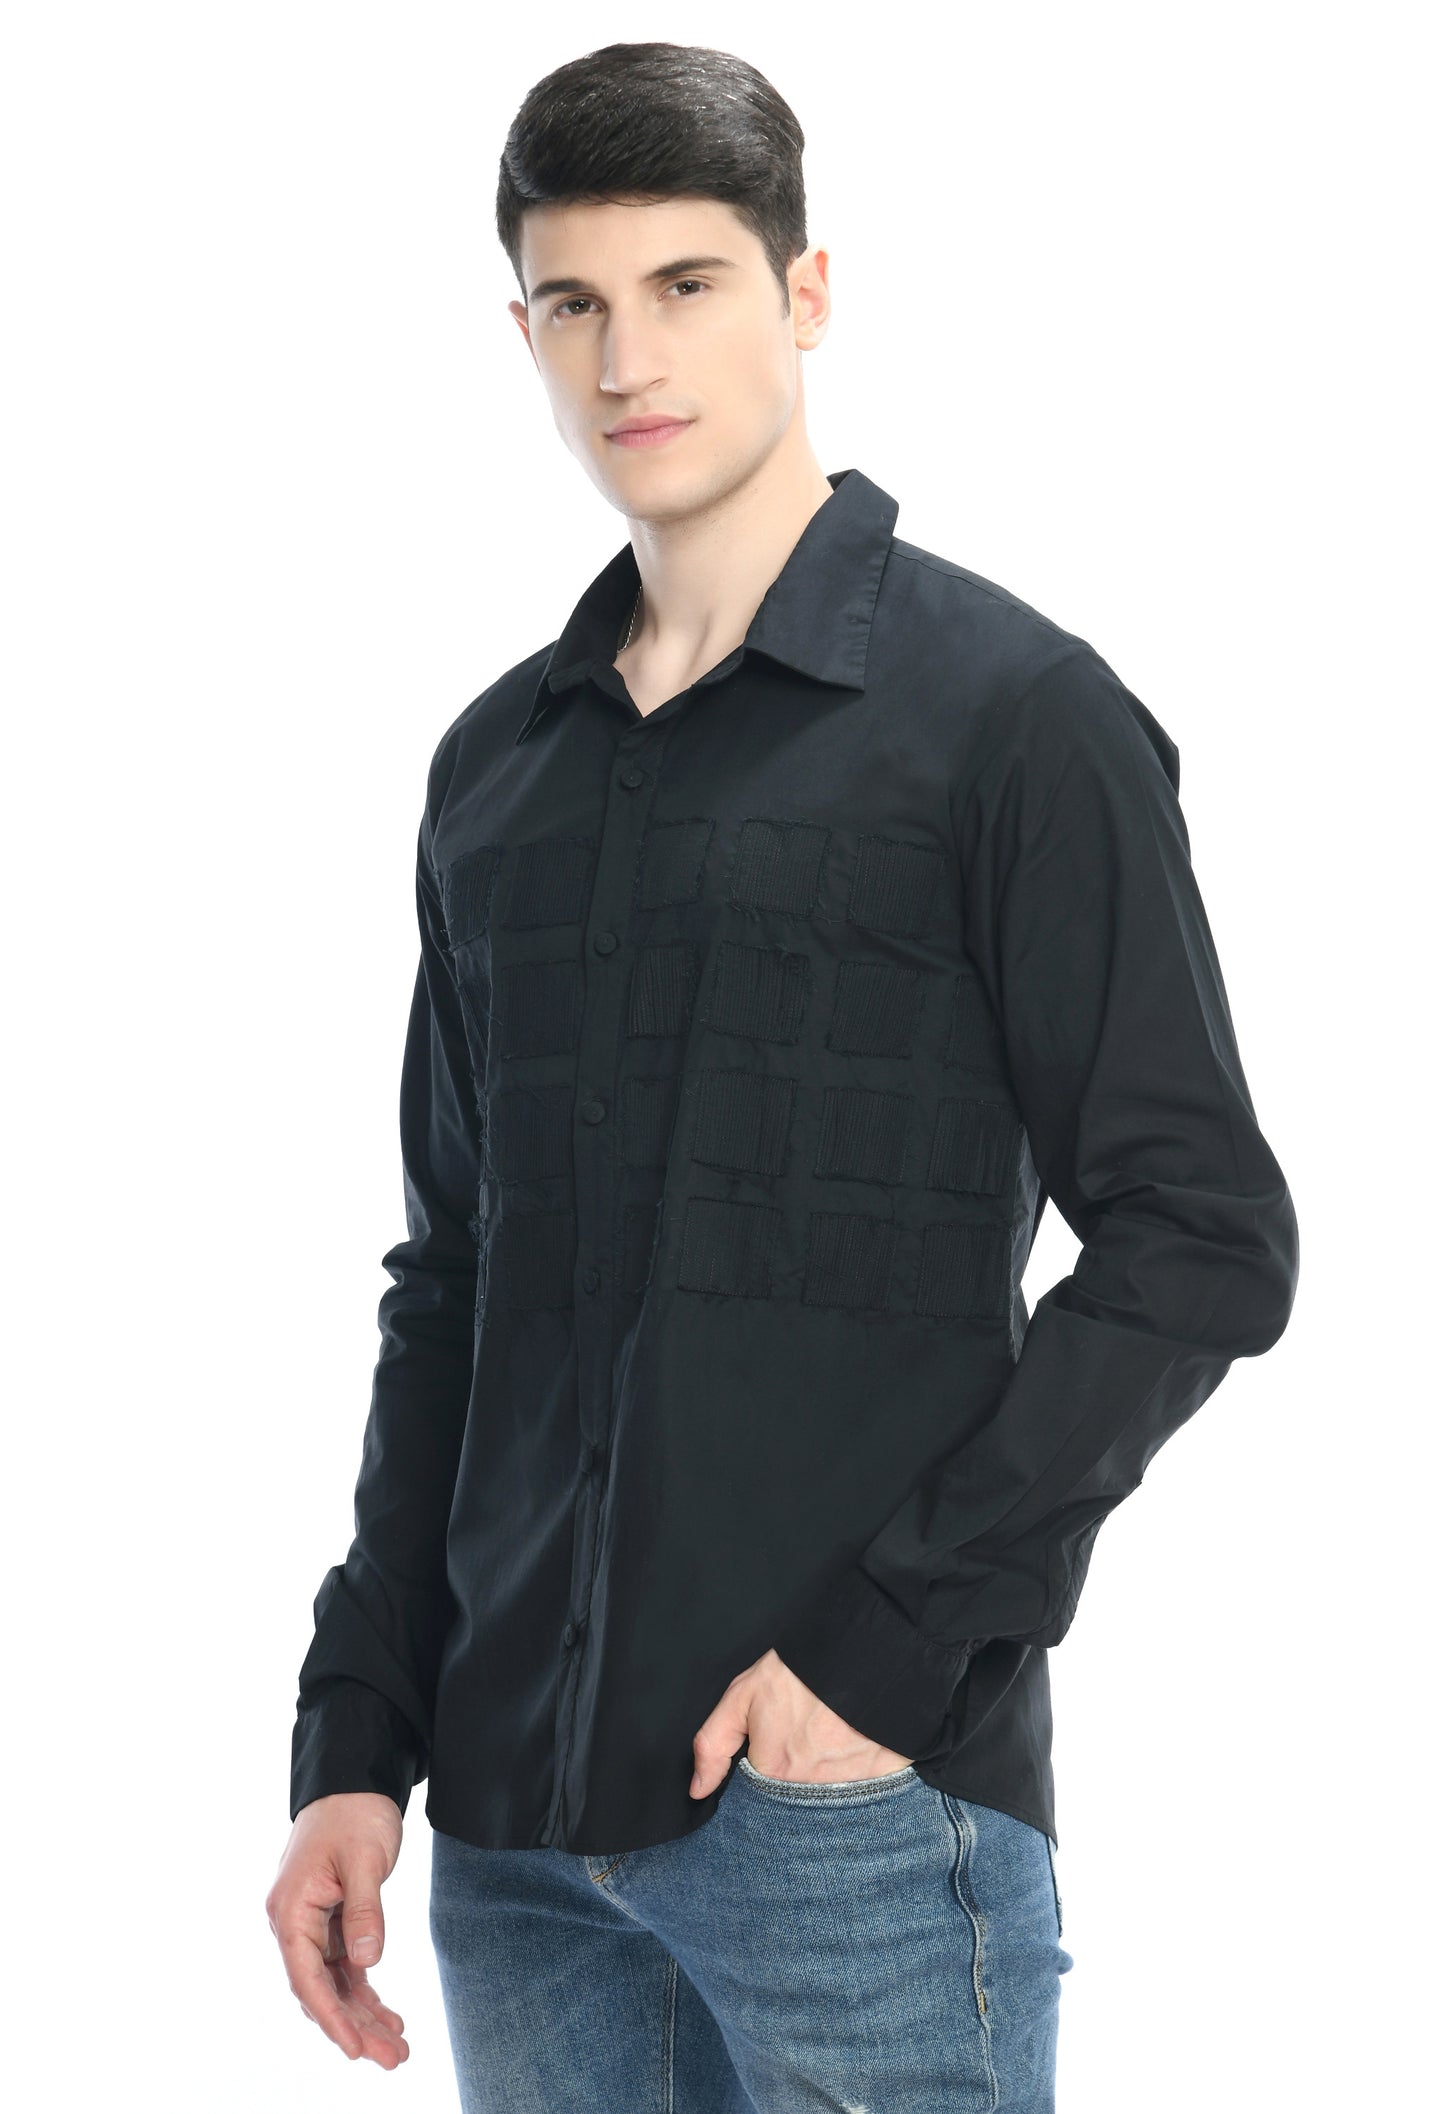 A black cotton shirt showcasing tone on tone appliqué work in form of small square cut design.